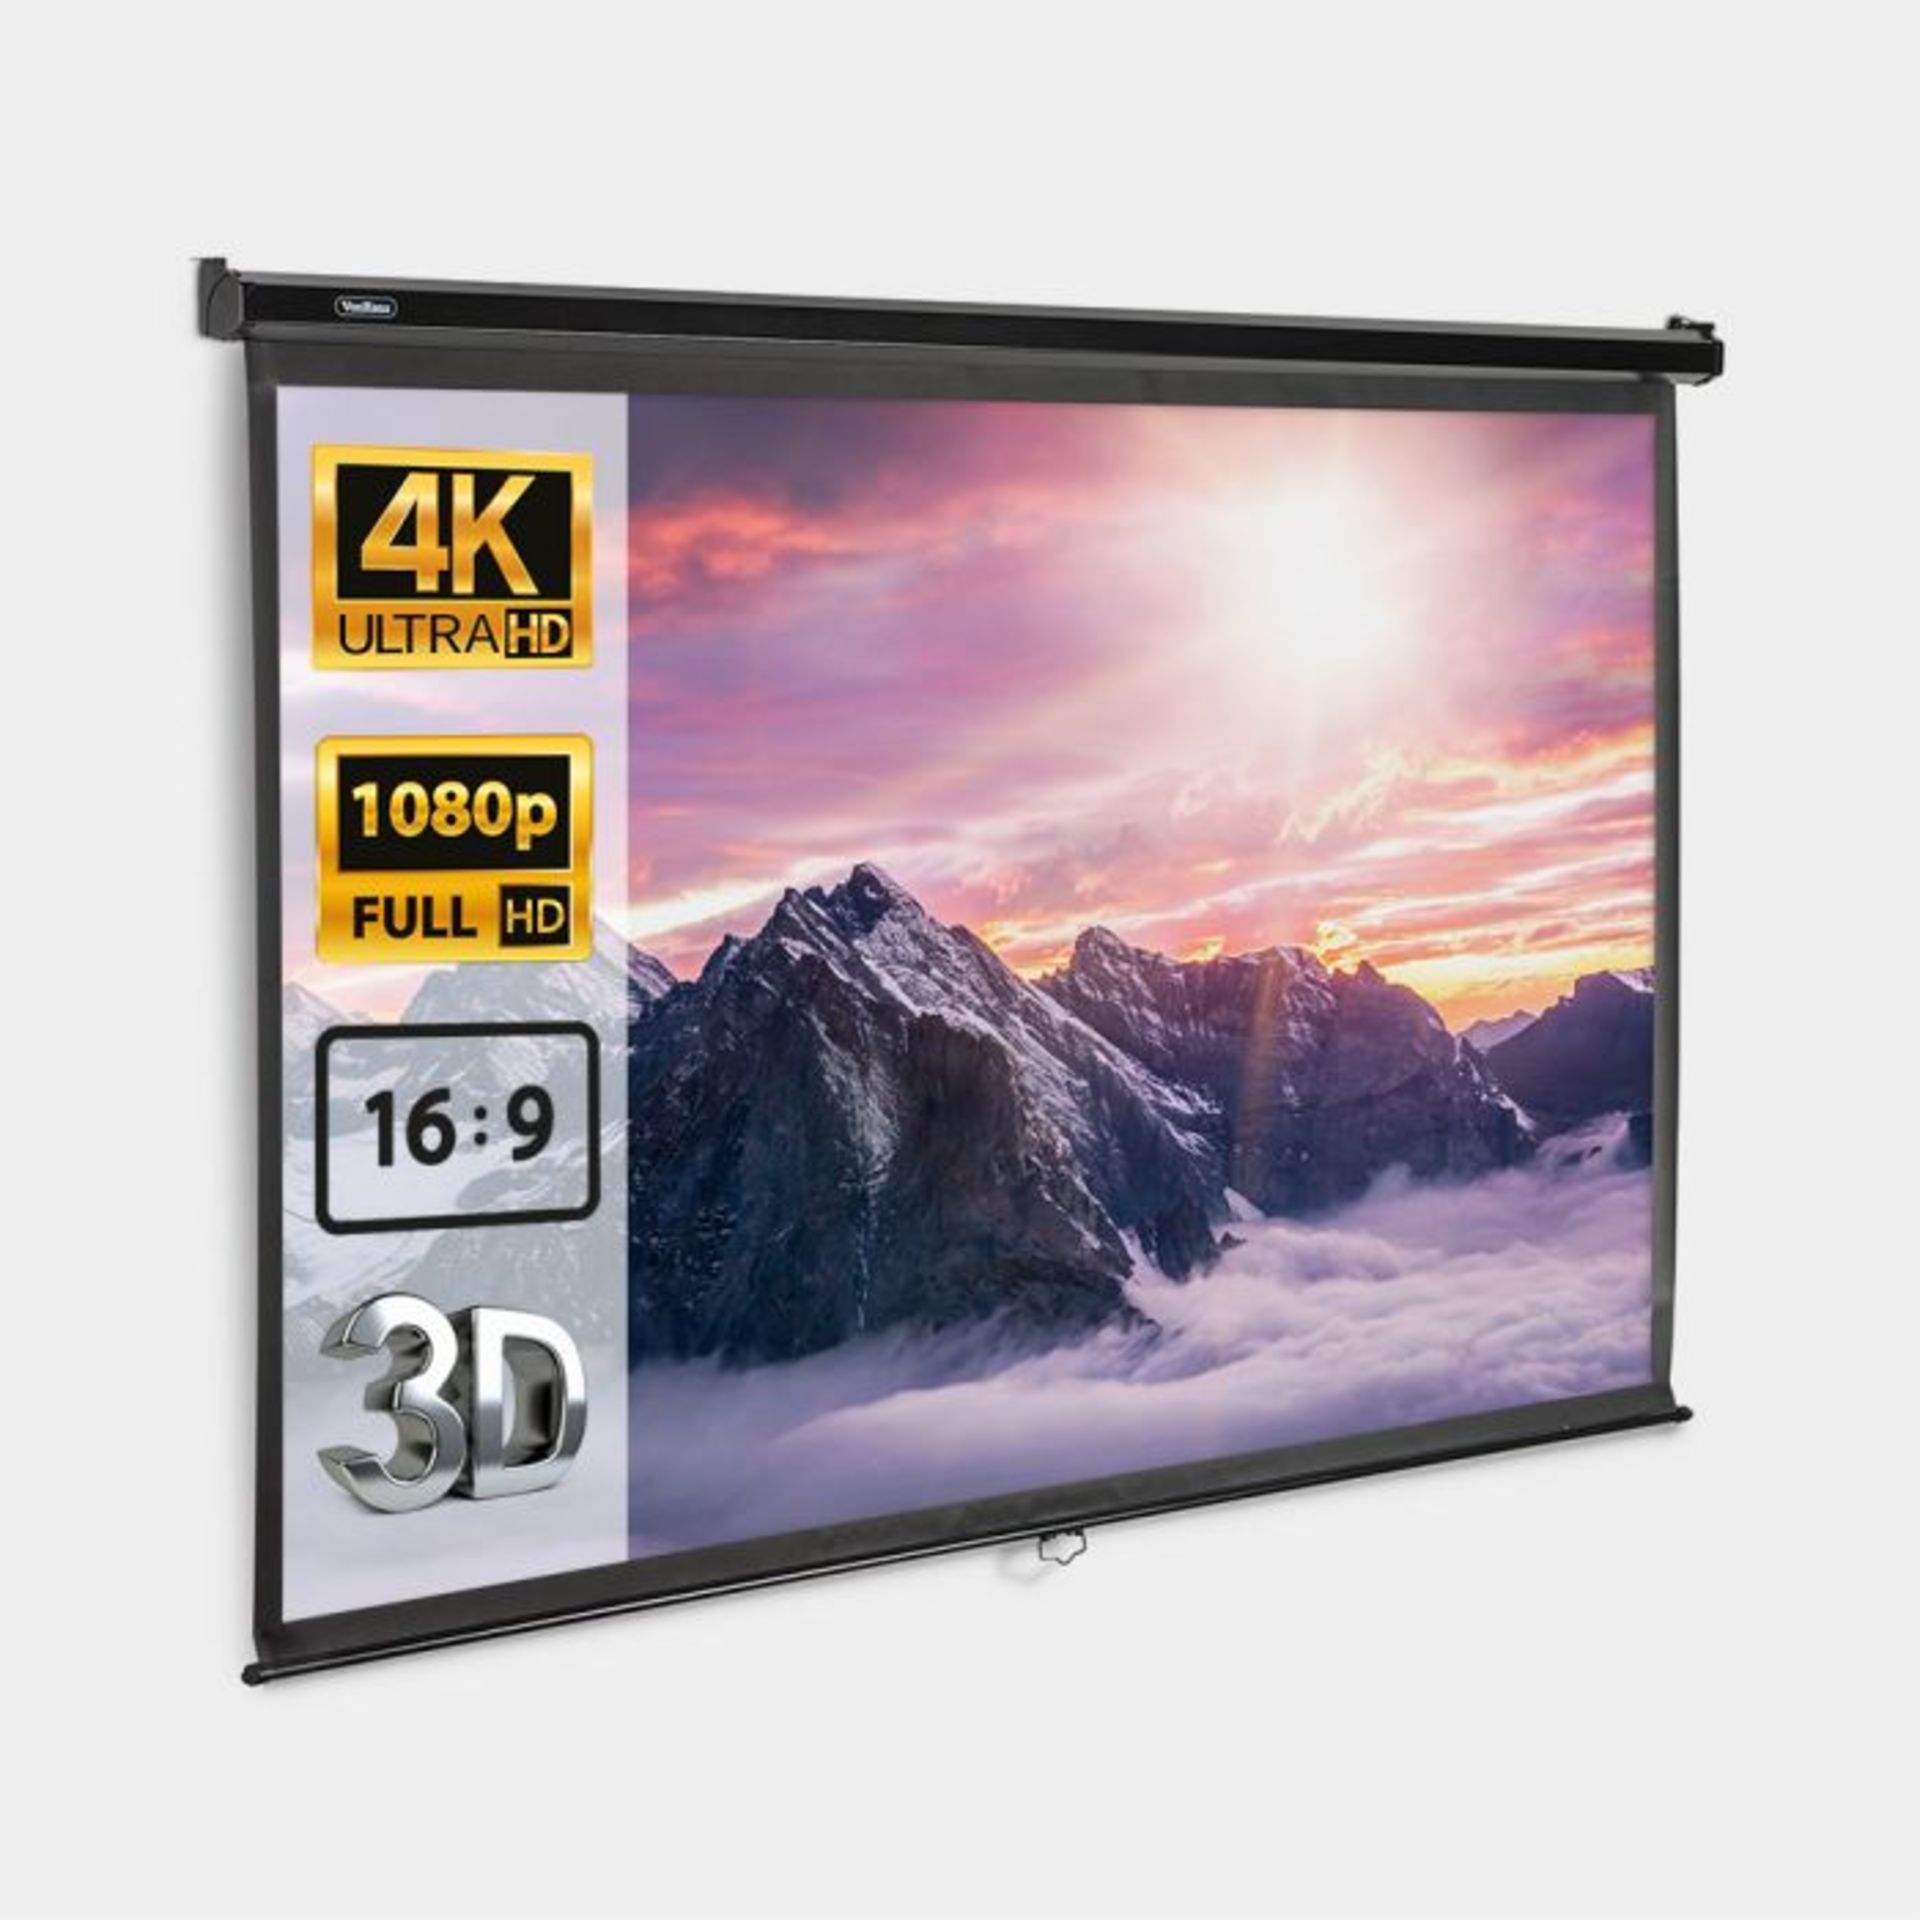 80-Inch Pull-Down Projector Screen. - ER34. It boasts a widescreen 16:9 aspect ratio and 1.1 gain